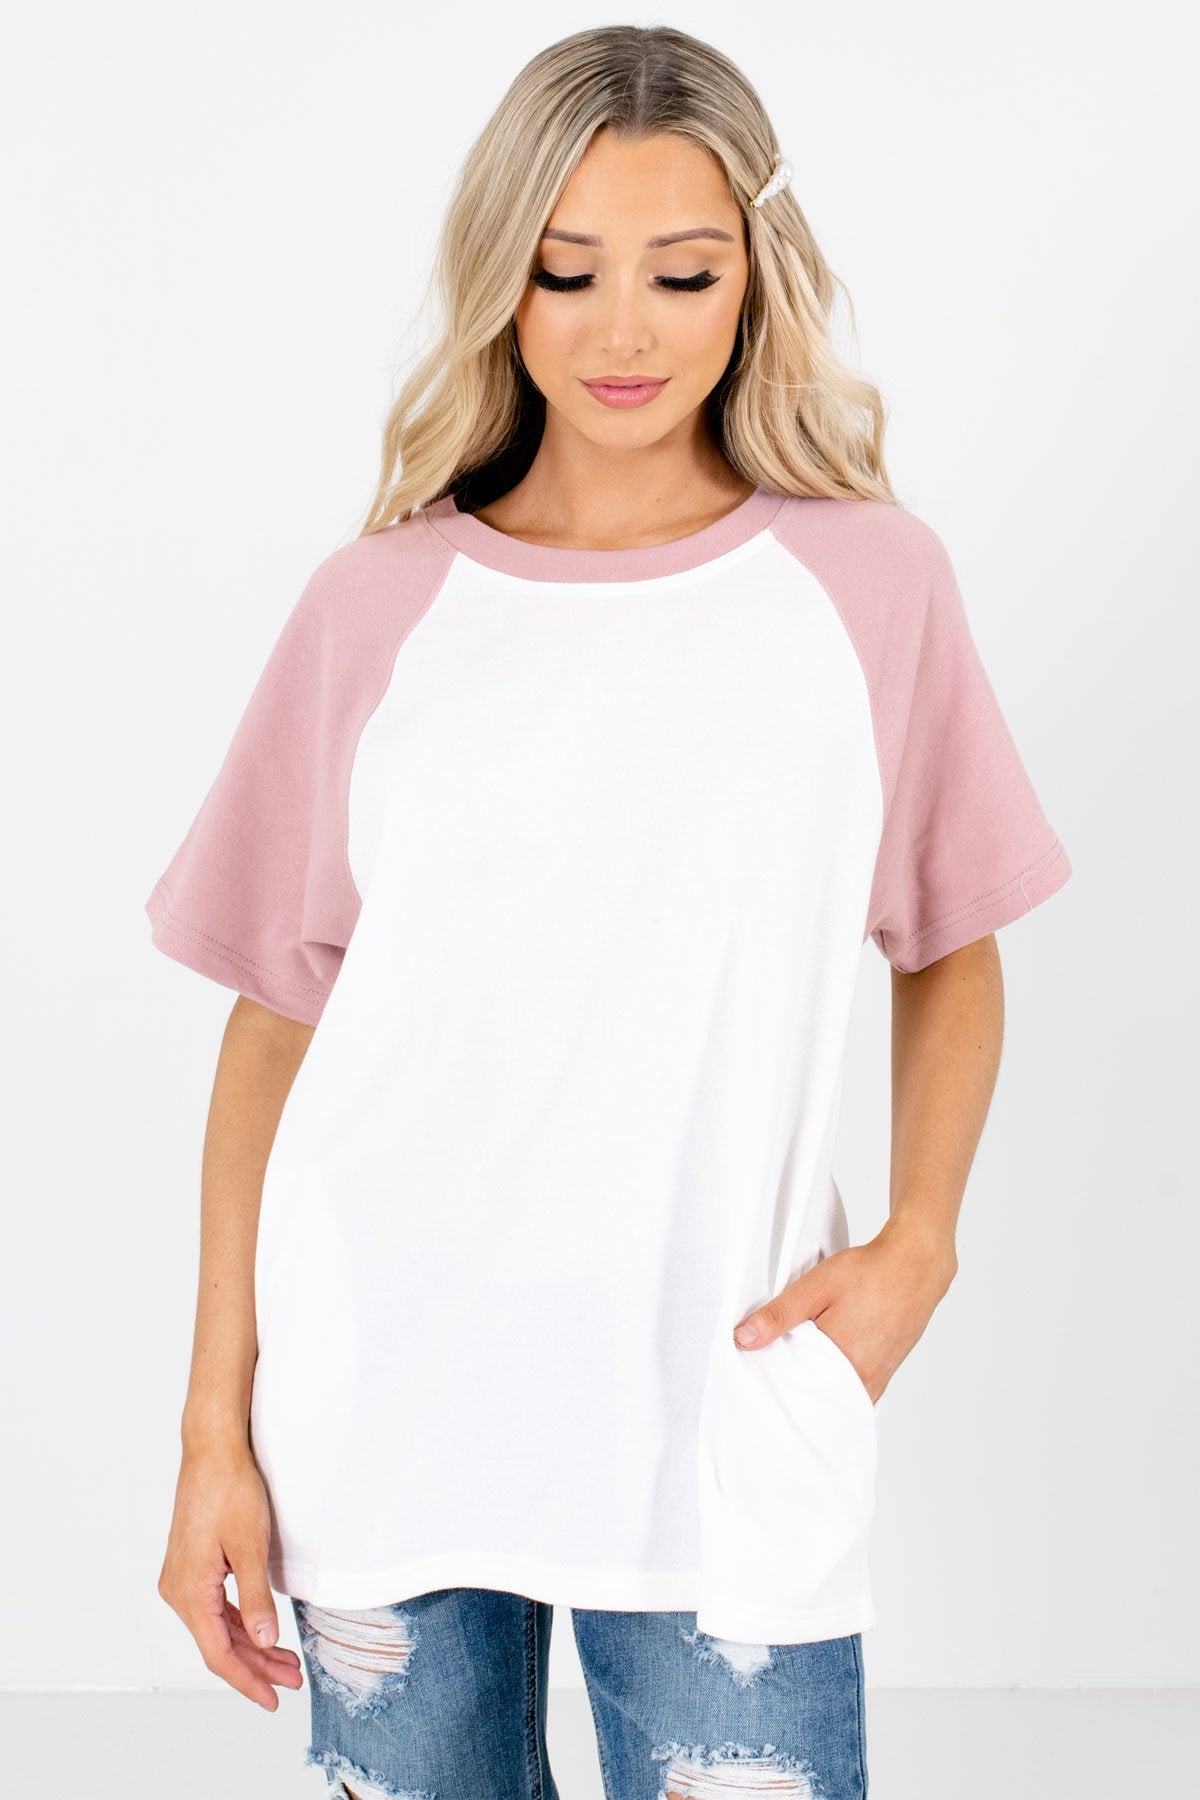 White and Pink Raglan Style Boutique T-Shirts for Women